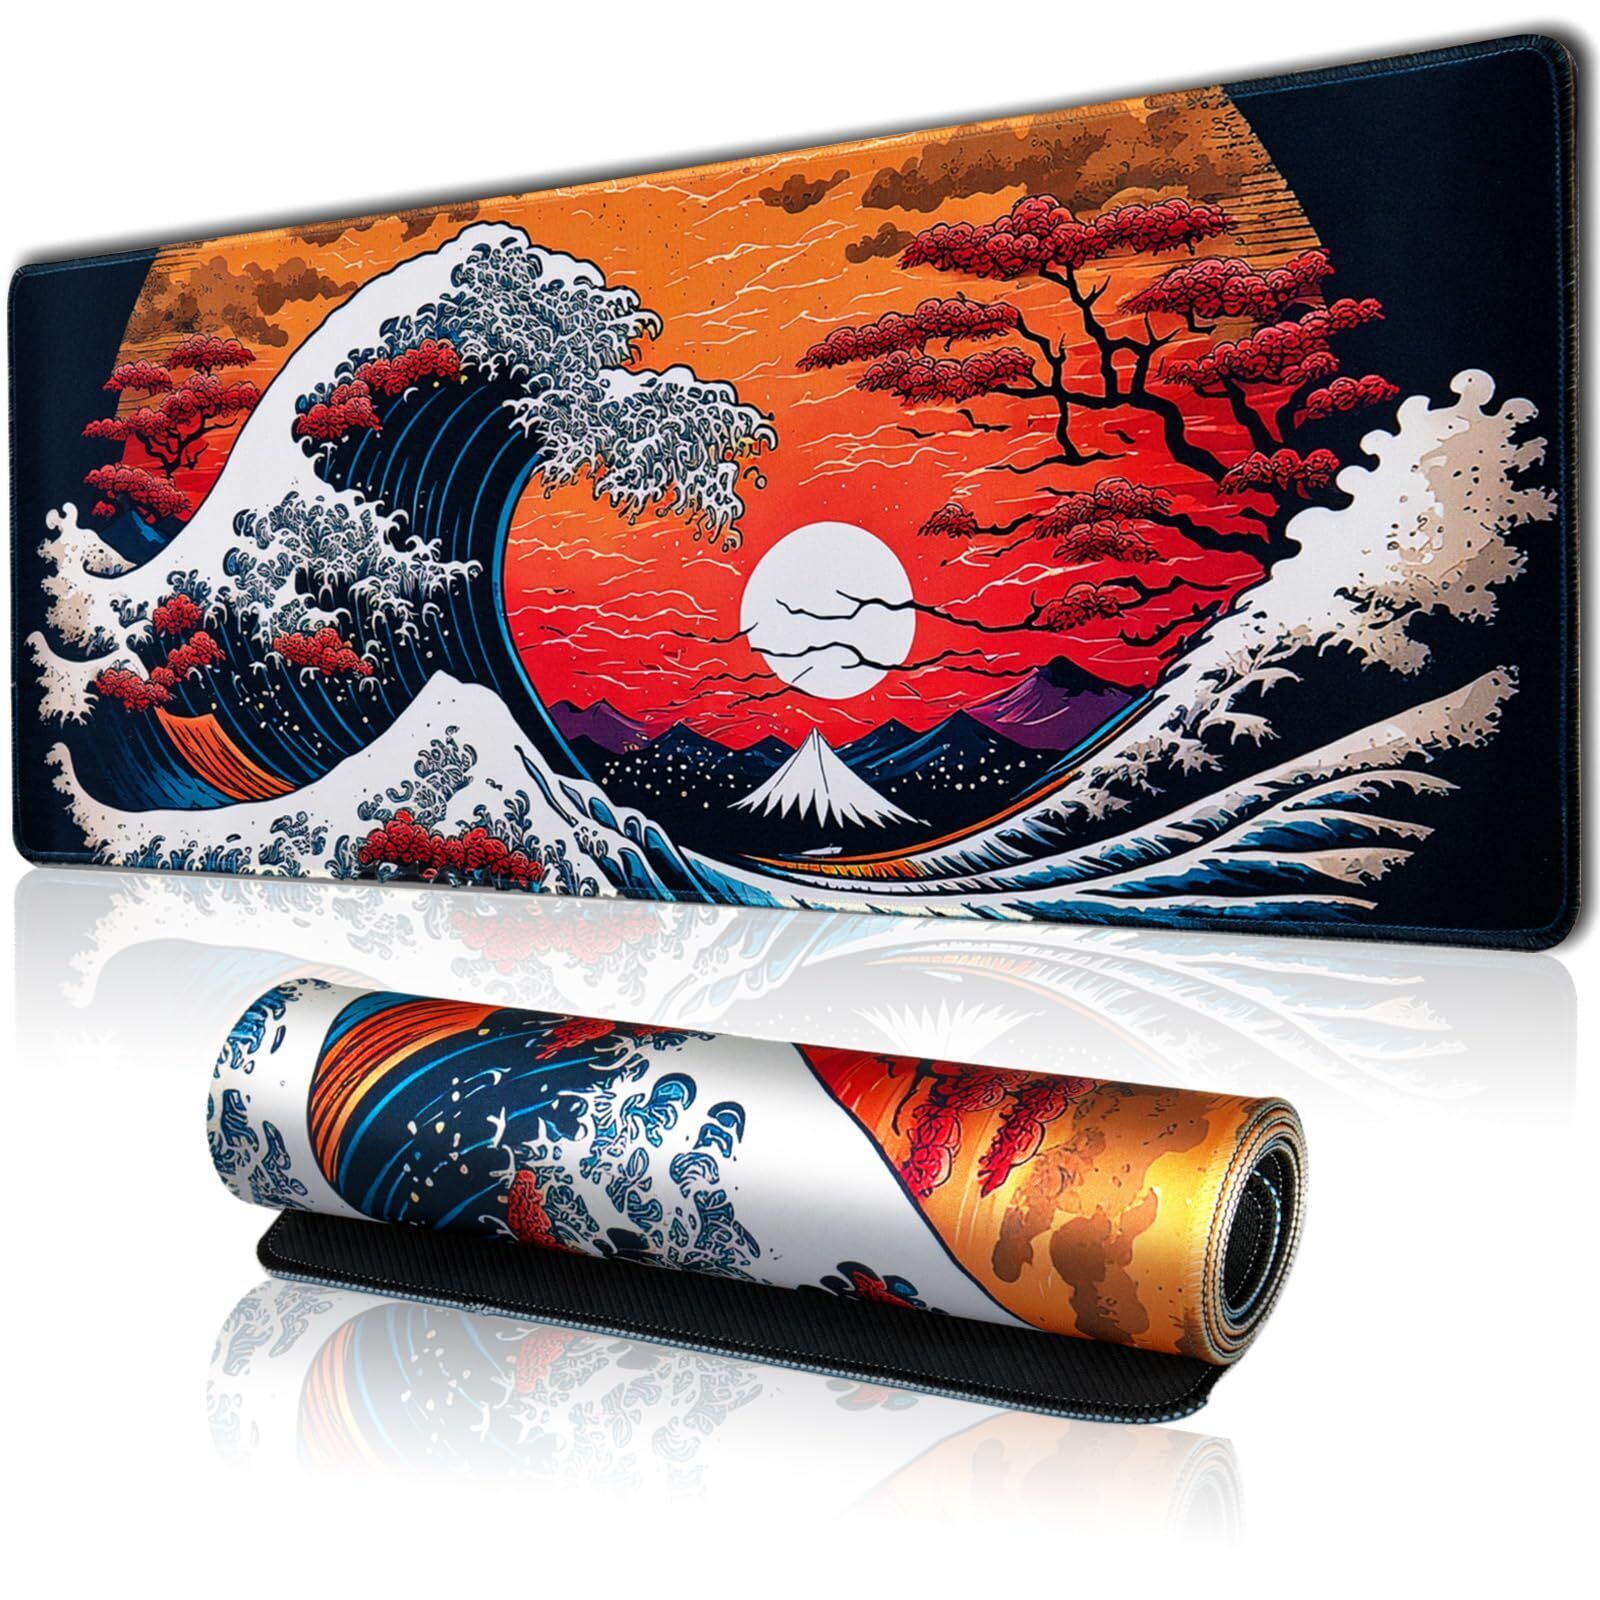 Japanese Sea Waves Large Gaming Mouse Pad for Desk, Desk Mat with Seamed Edge...